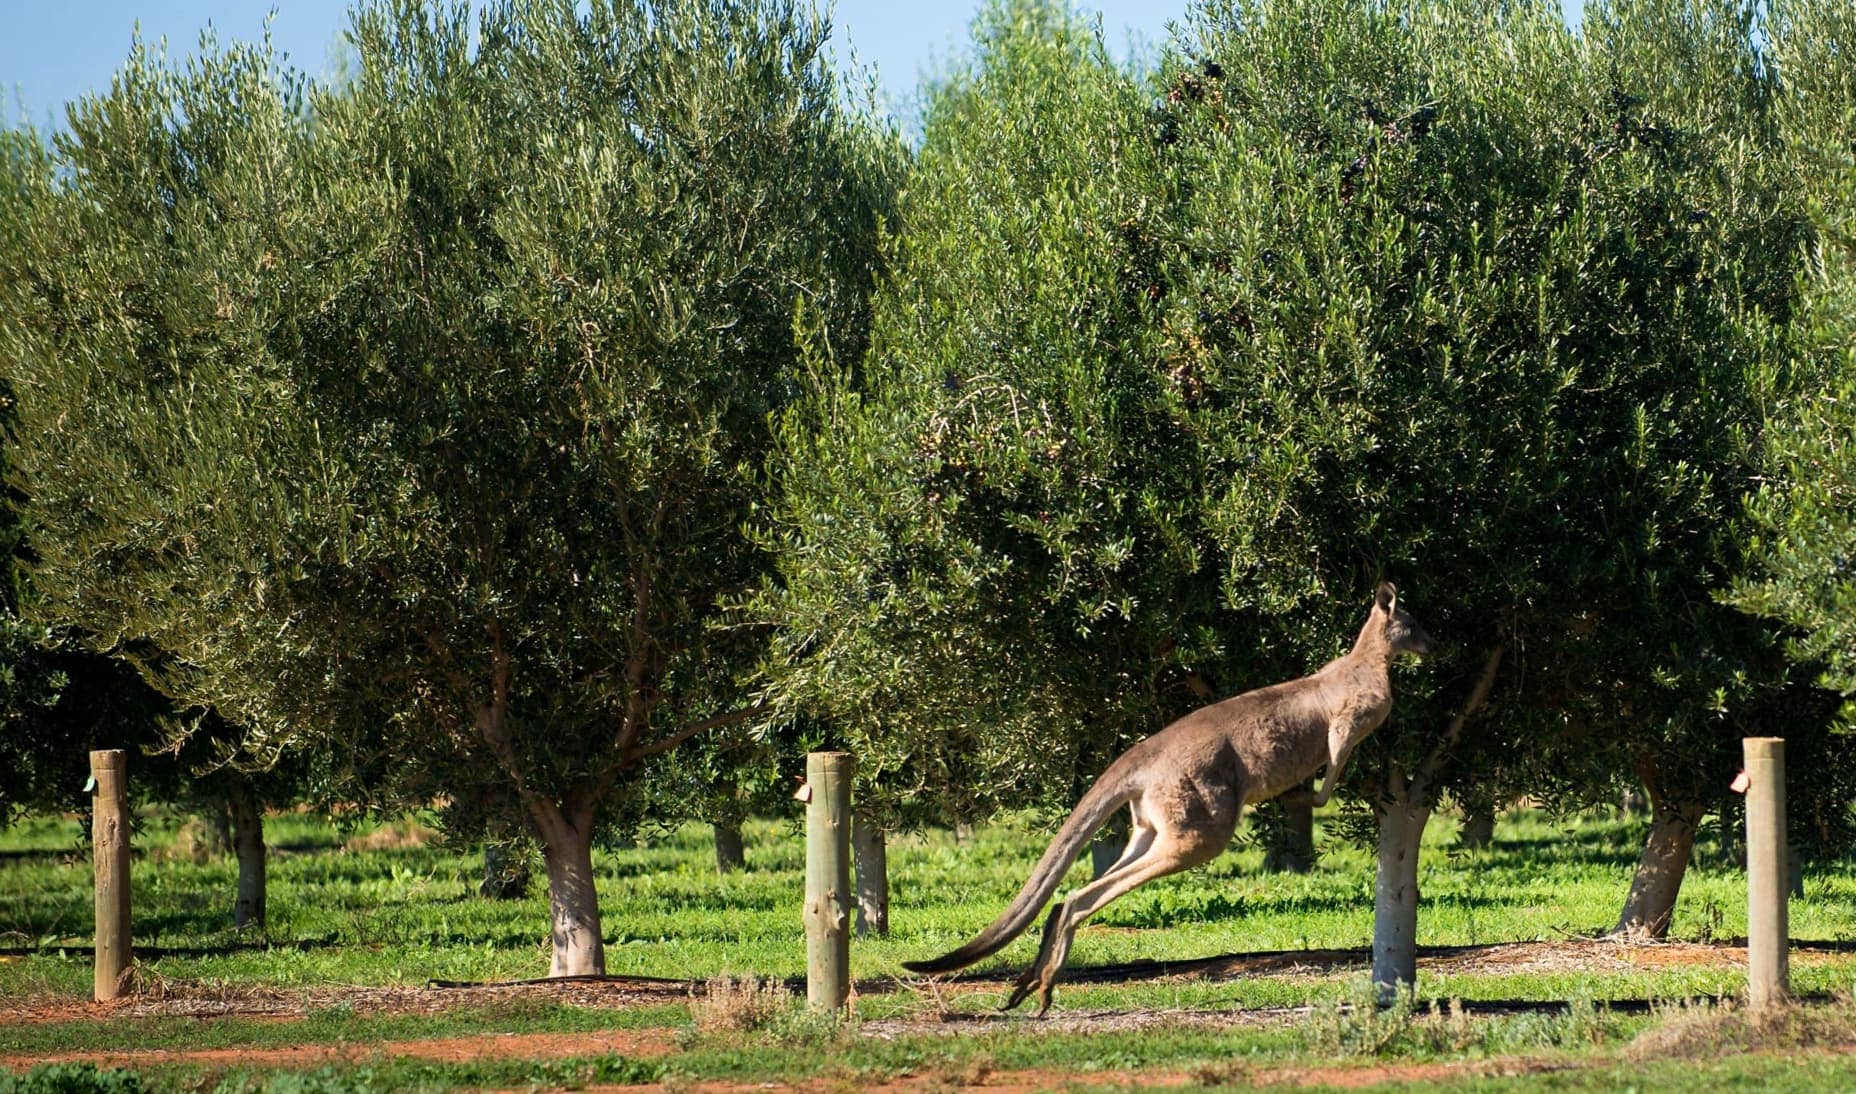 australia-and-new-zealand-production-business-after-initial-optimism-mixed-results-for-australian-producers-olive-oil-times